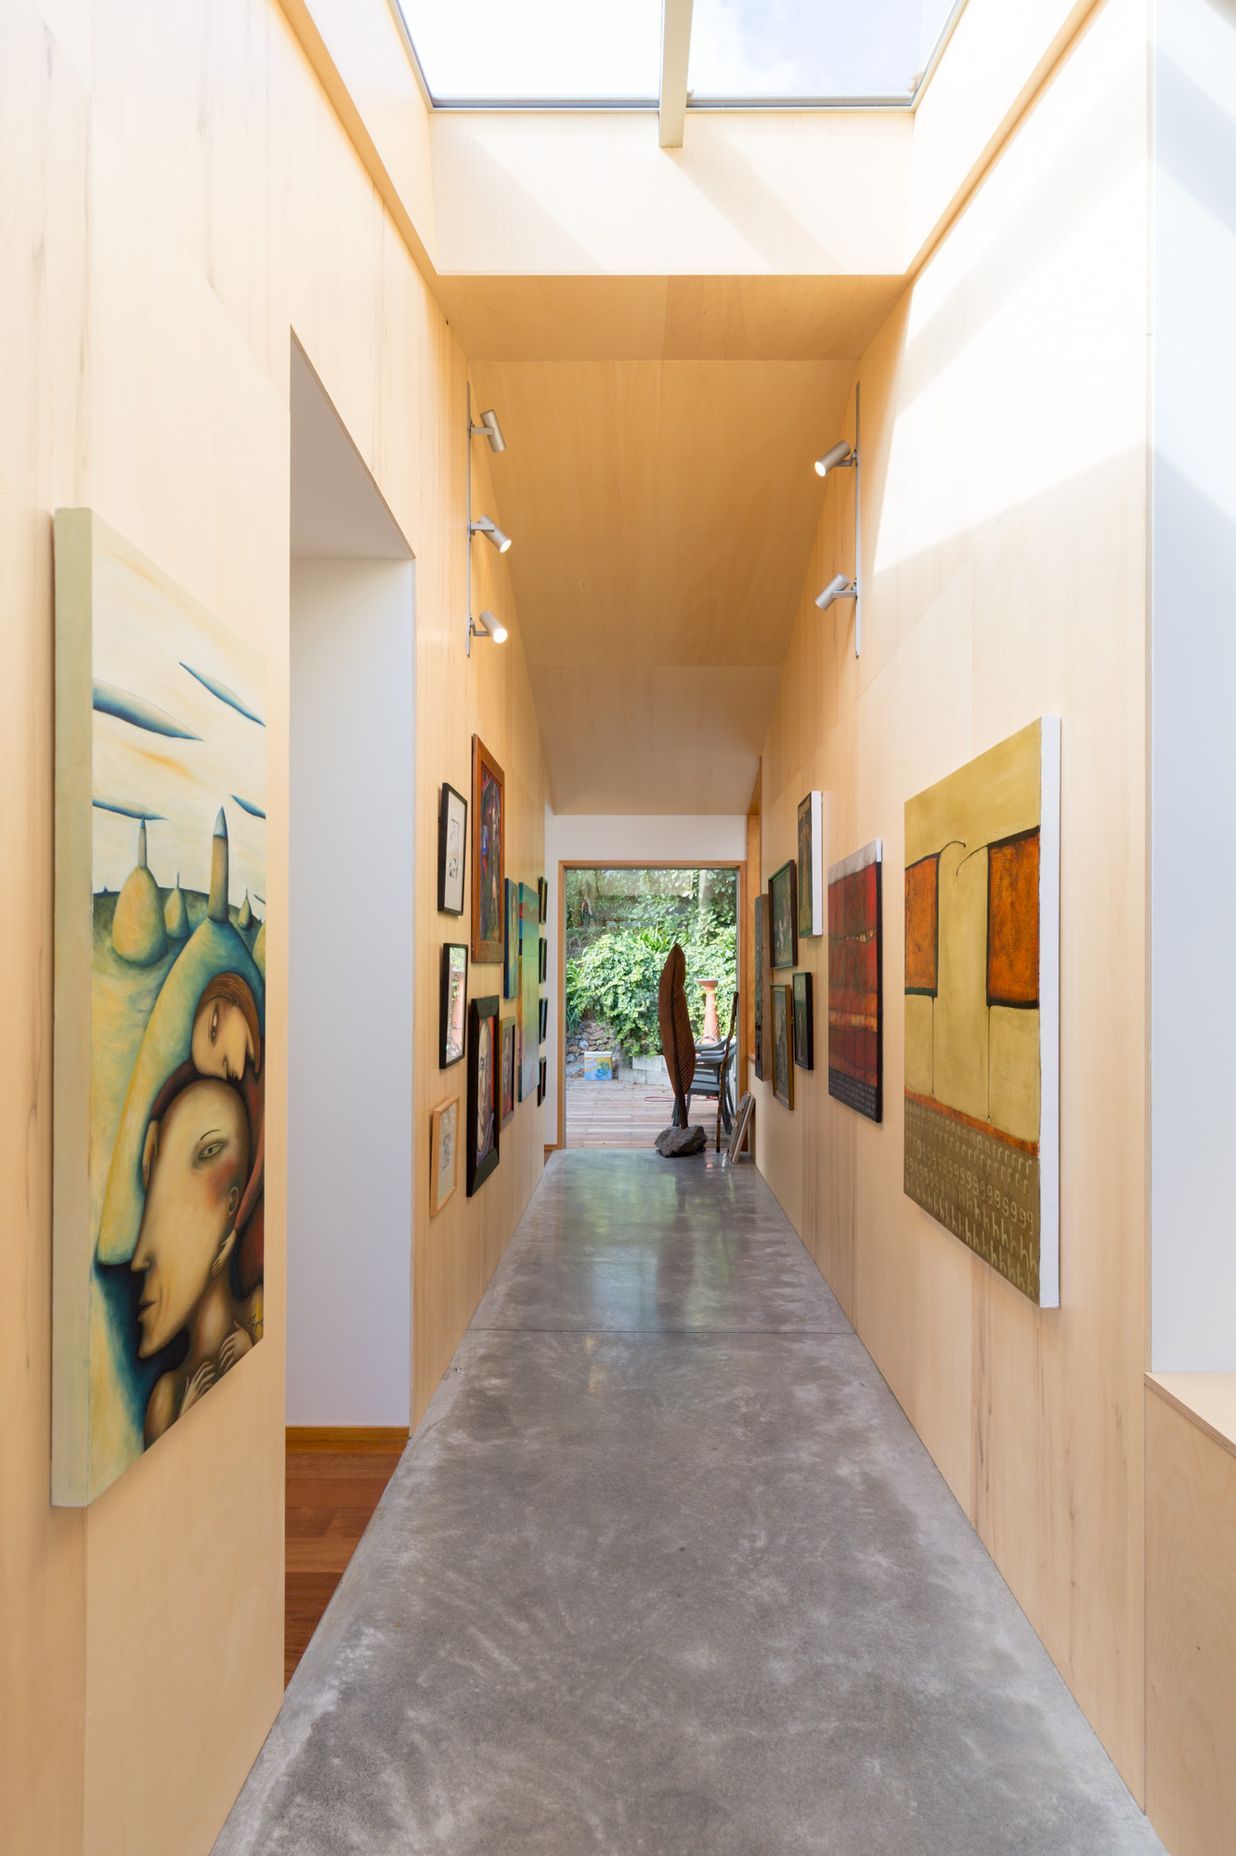 The entryway opens onto a gallery space, with the open-plan living situated to the left and access two the new double-storey extension to the right.